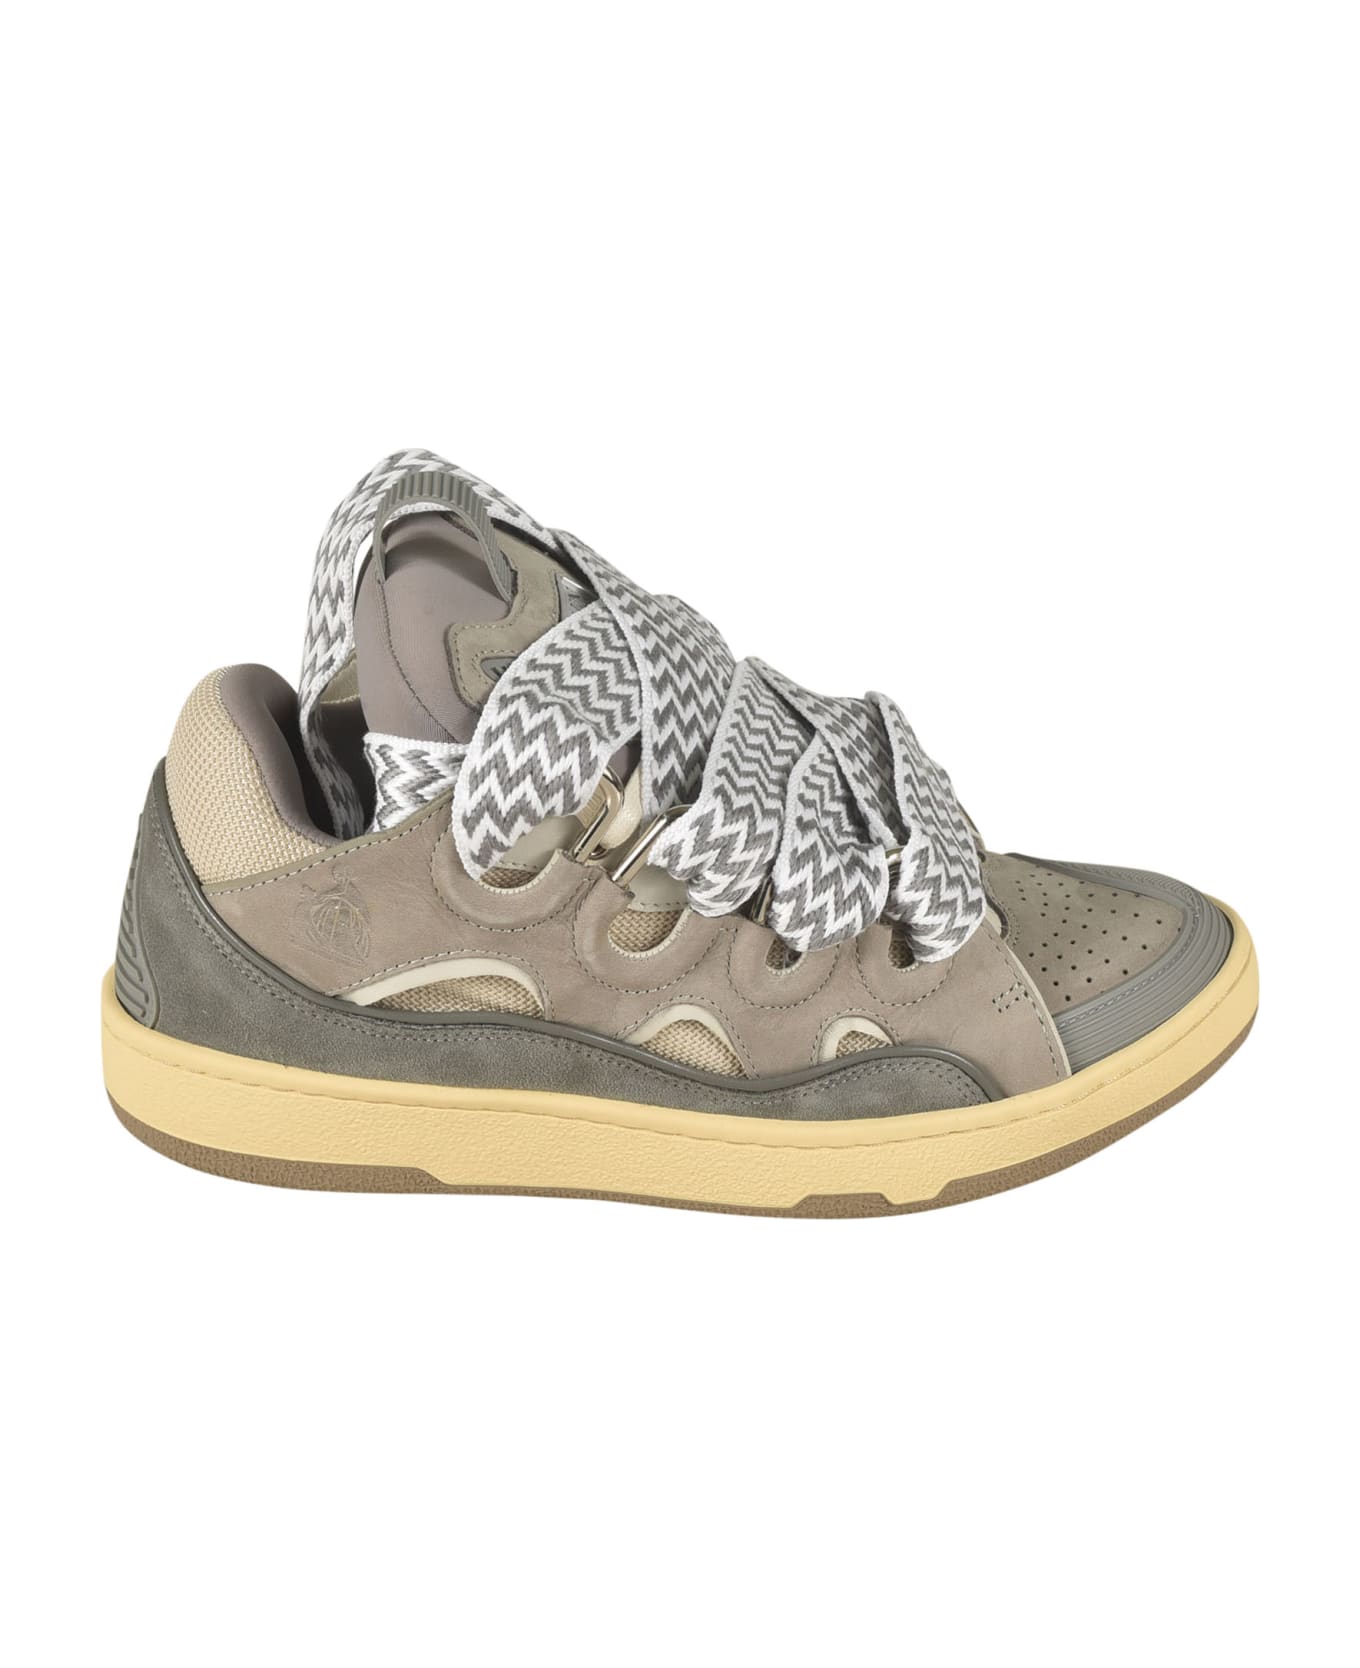 Lanvin Thick Lace Sneakers - Grey スニーカー